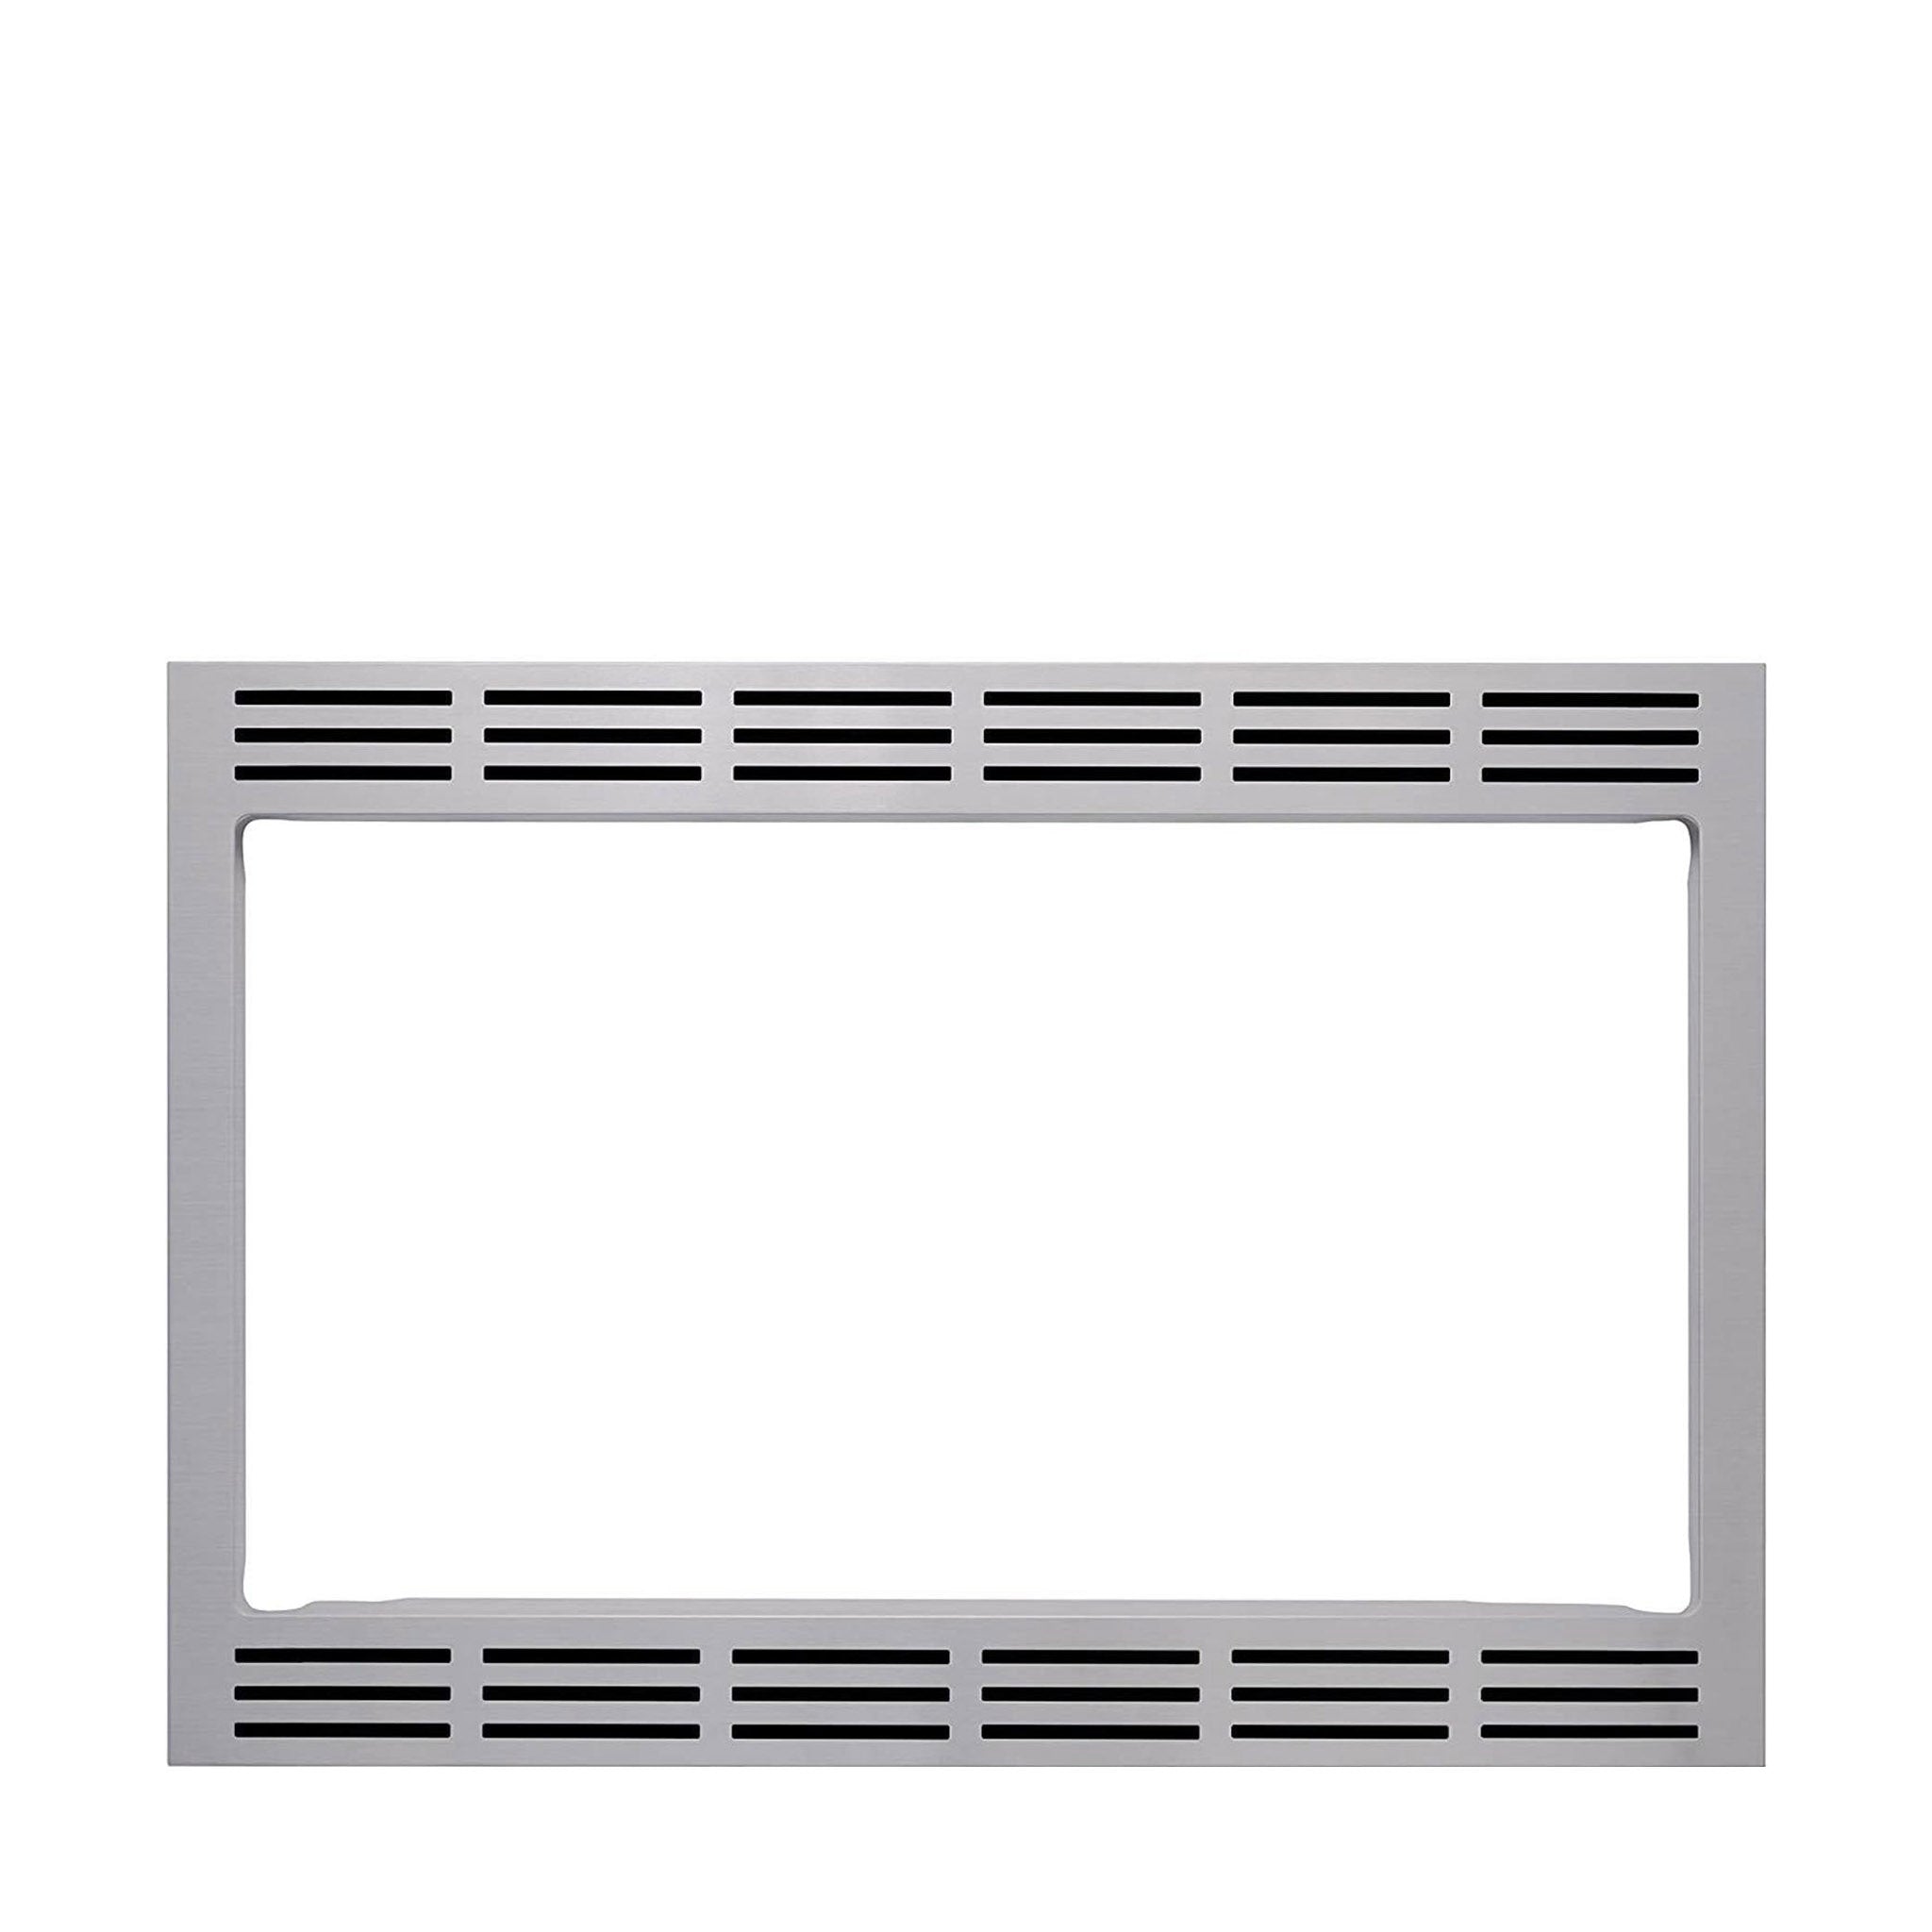 Panasonic 27-inch Built-In Microwave Oven Trim Kit for 2.2 cu. ft ...